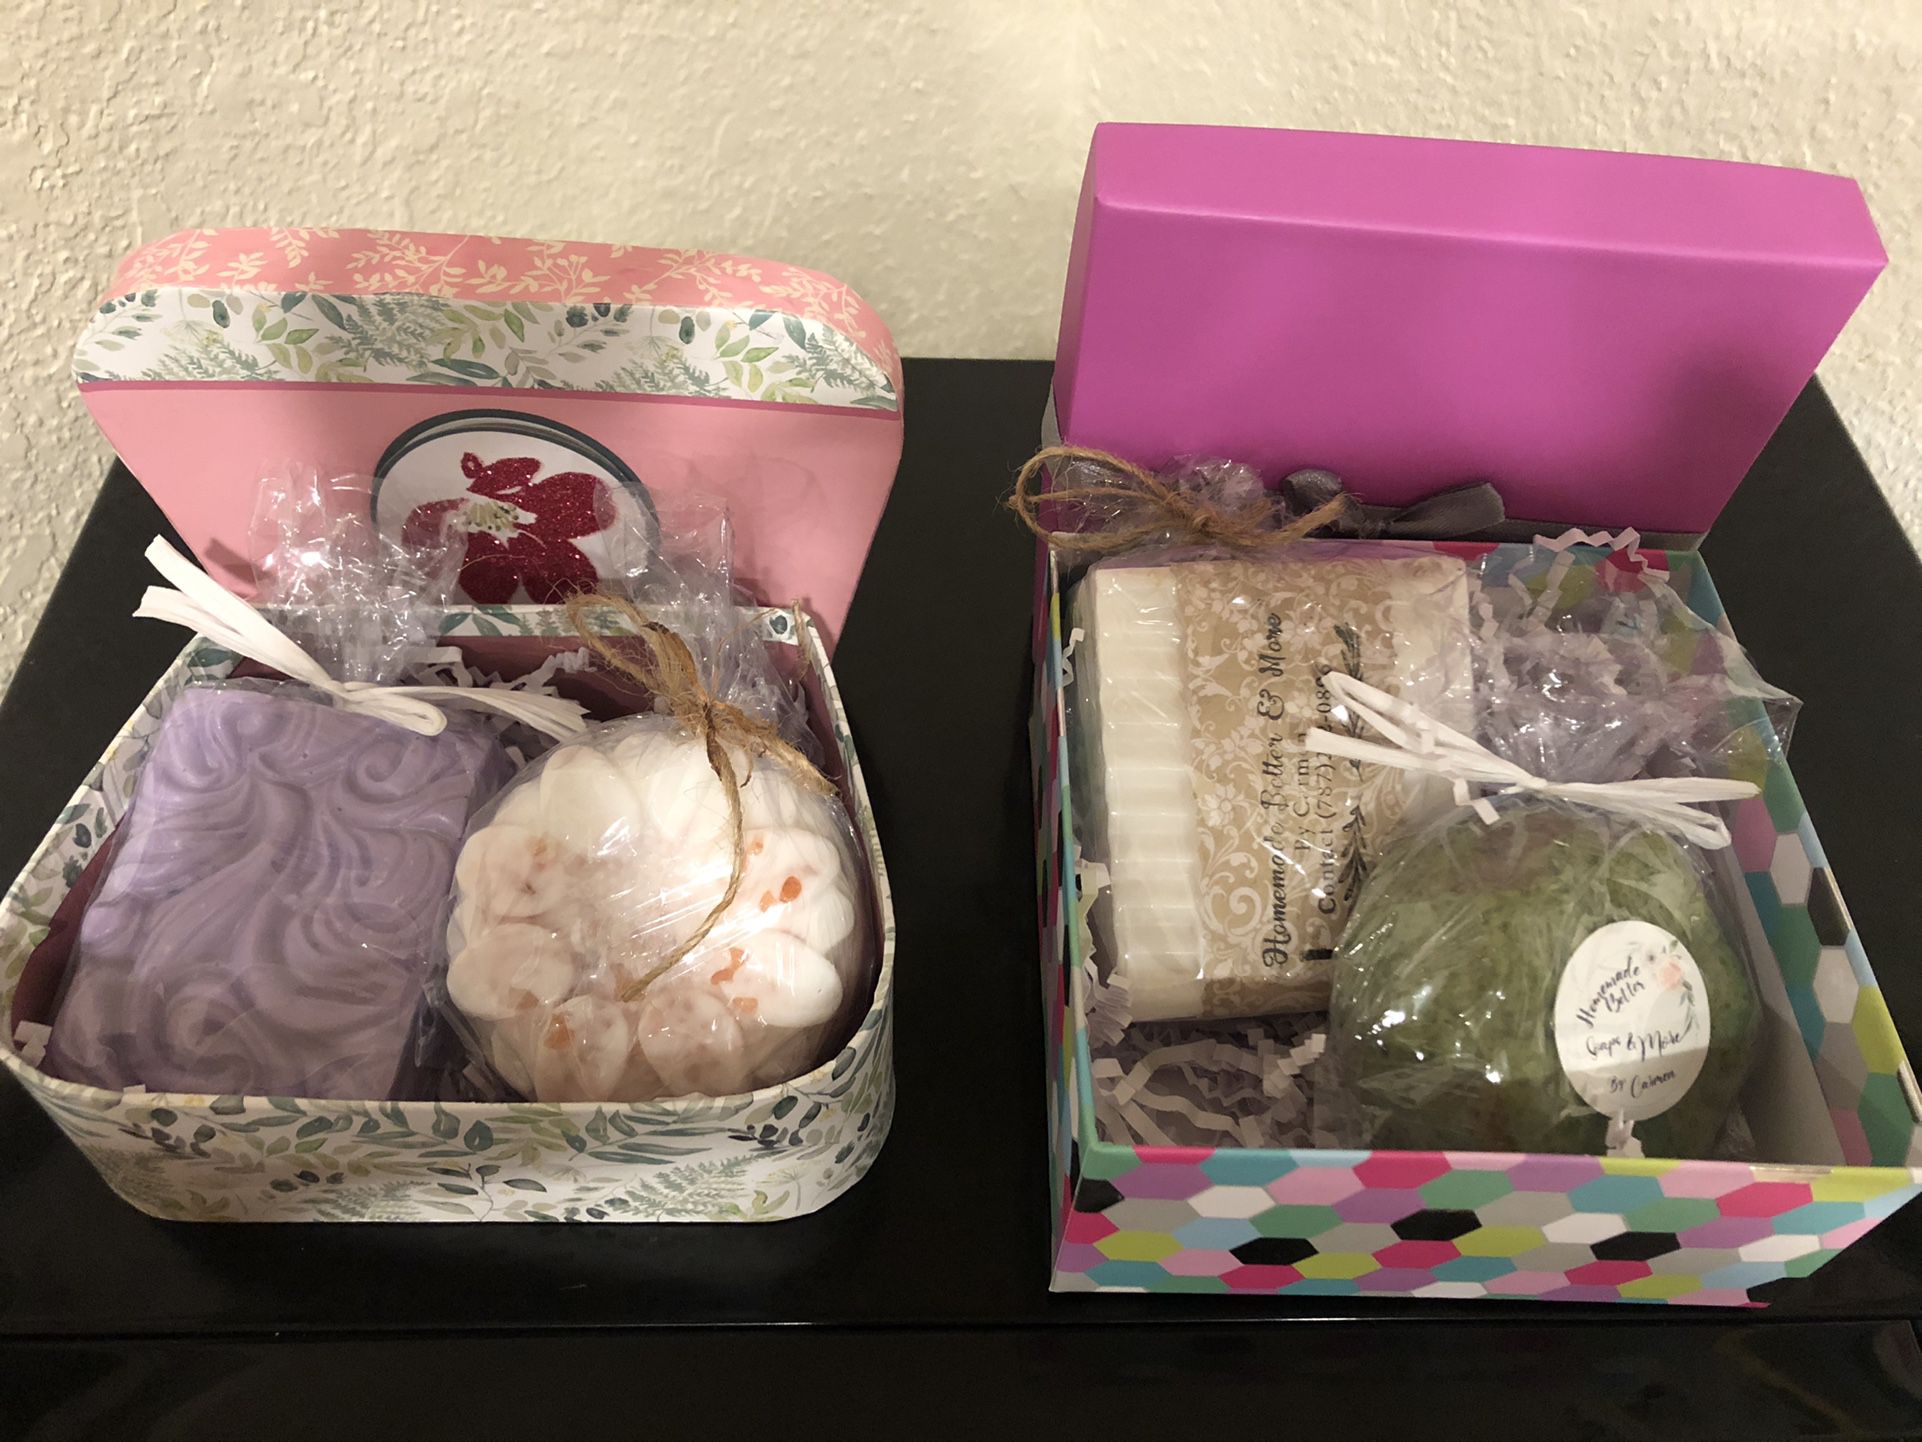 Homemade Organic Soaps ( Grate Gift For Mother’s Day ) Have Different Prices From $6, $10, $15 and $20